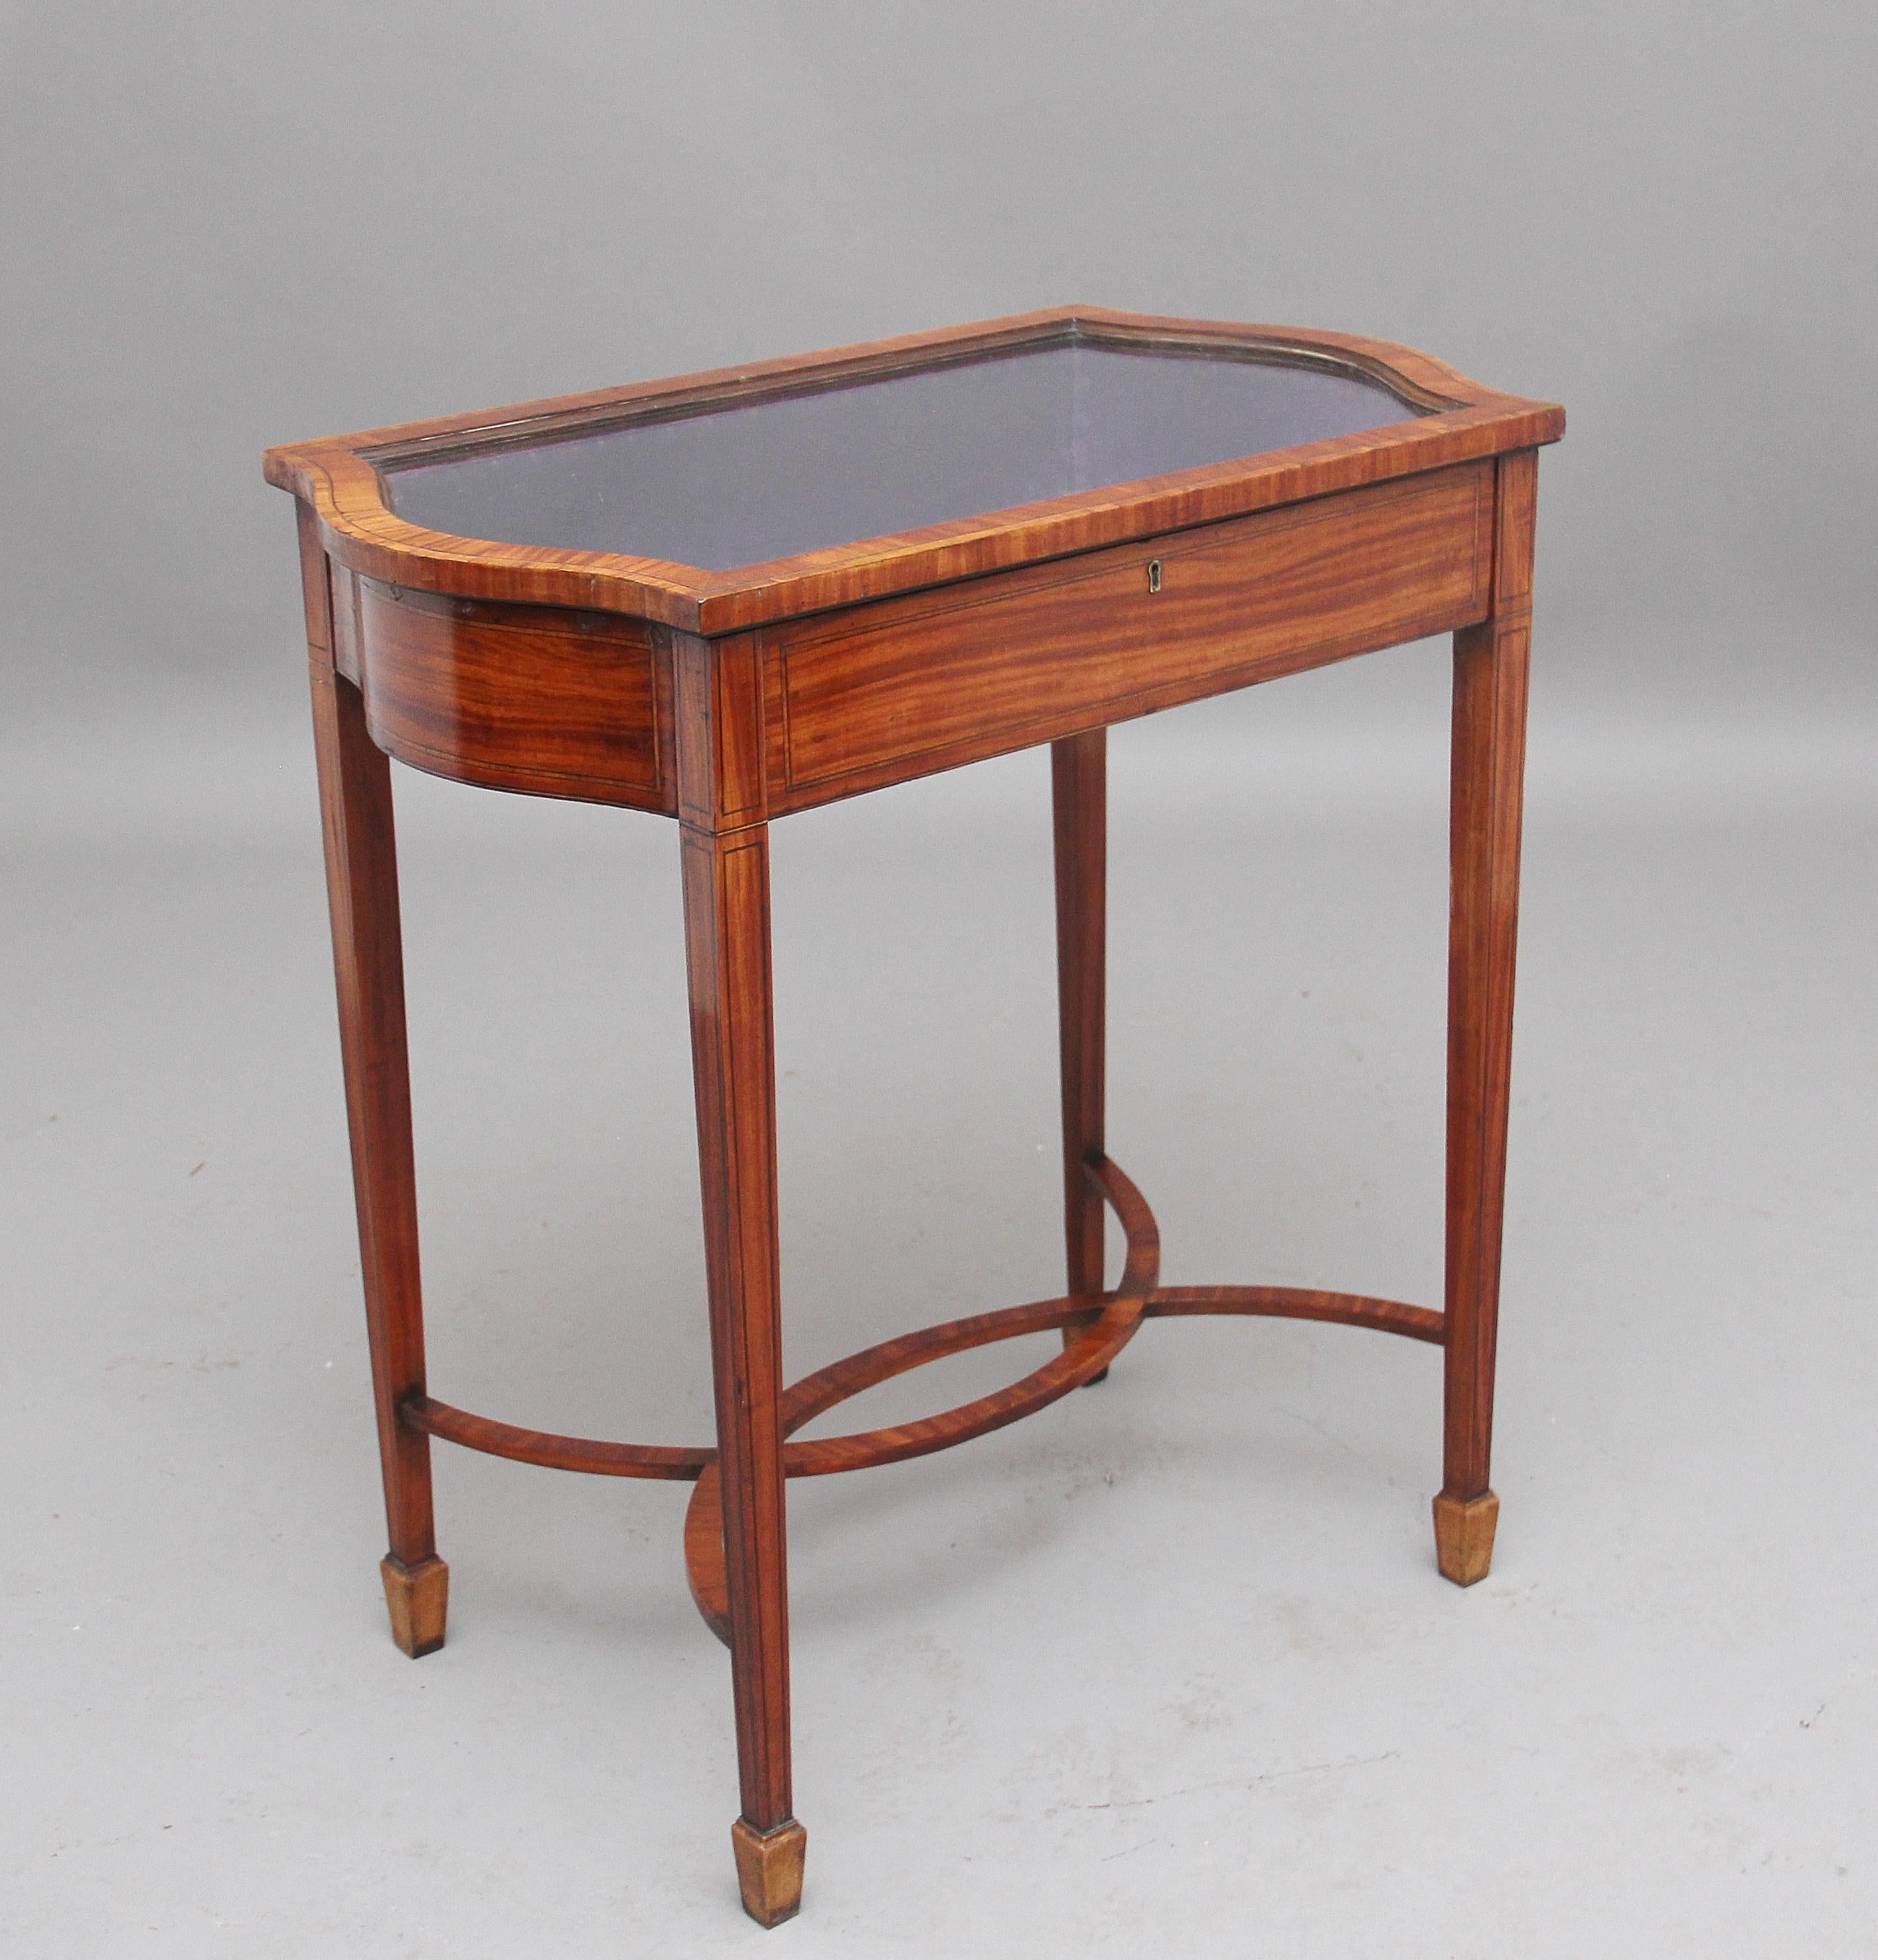 Edwardian Inlaid Satinwood Bijouterie Table In Good Condition For Sale In Martlesham, GB